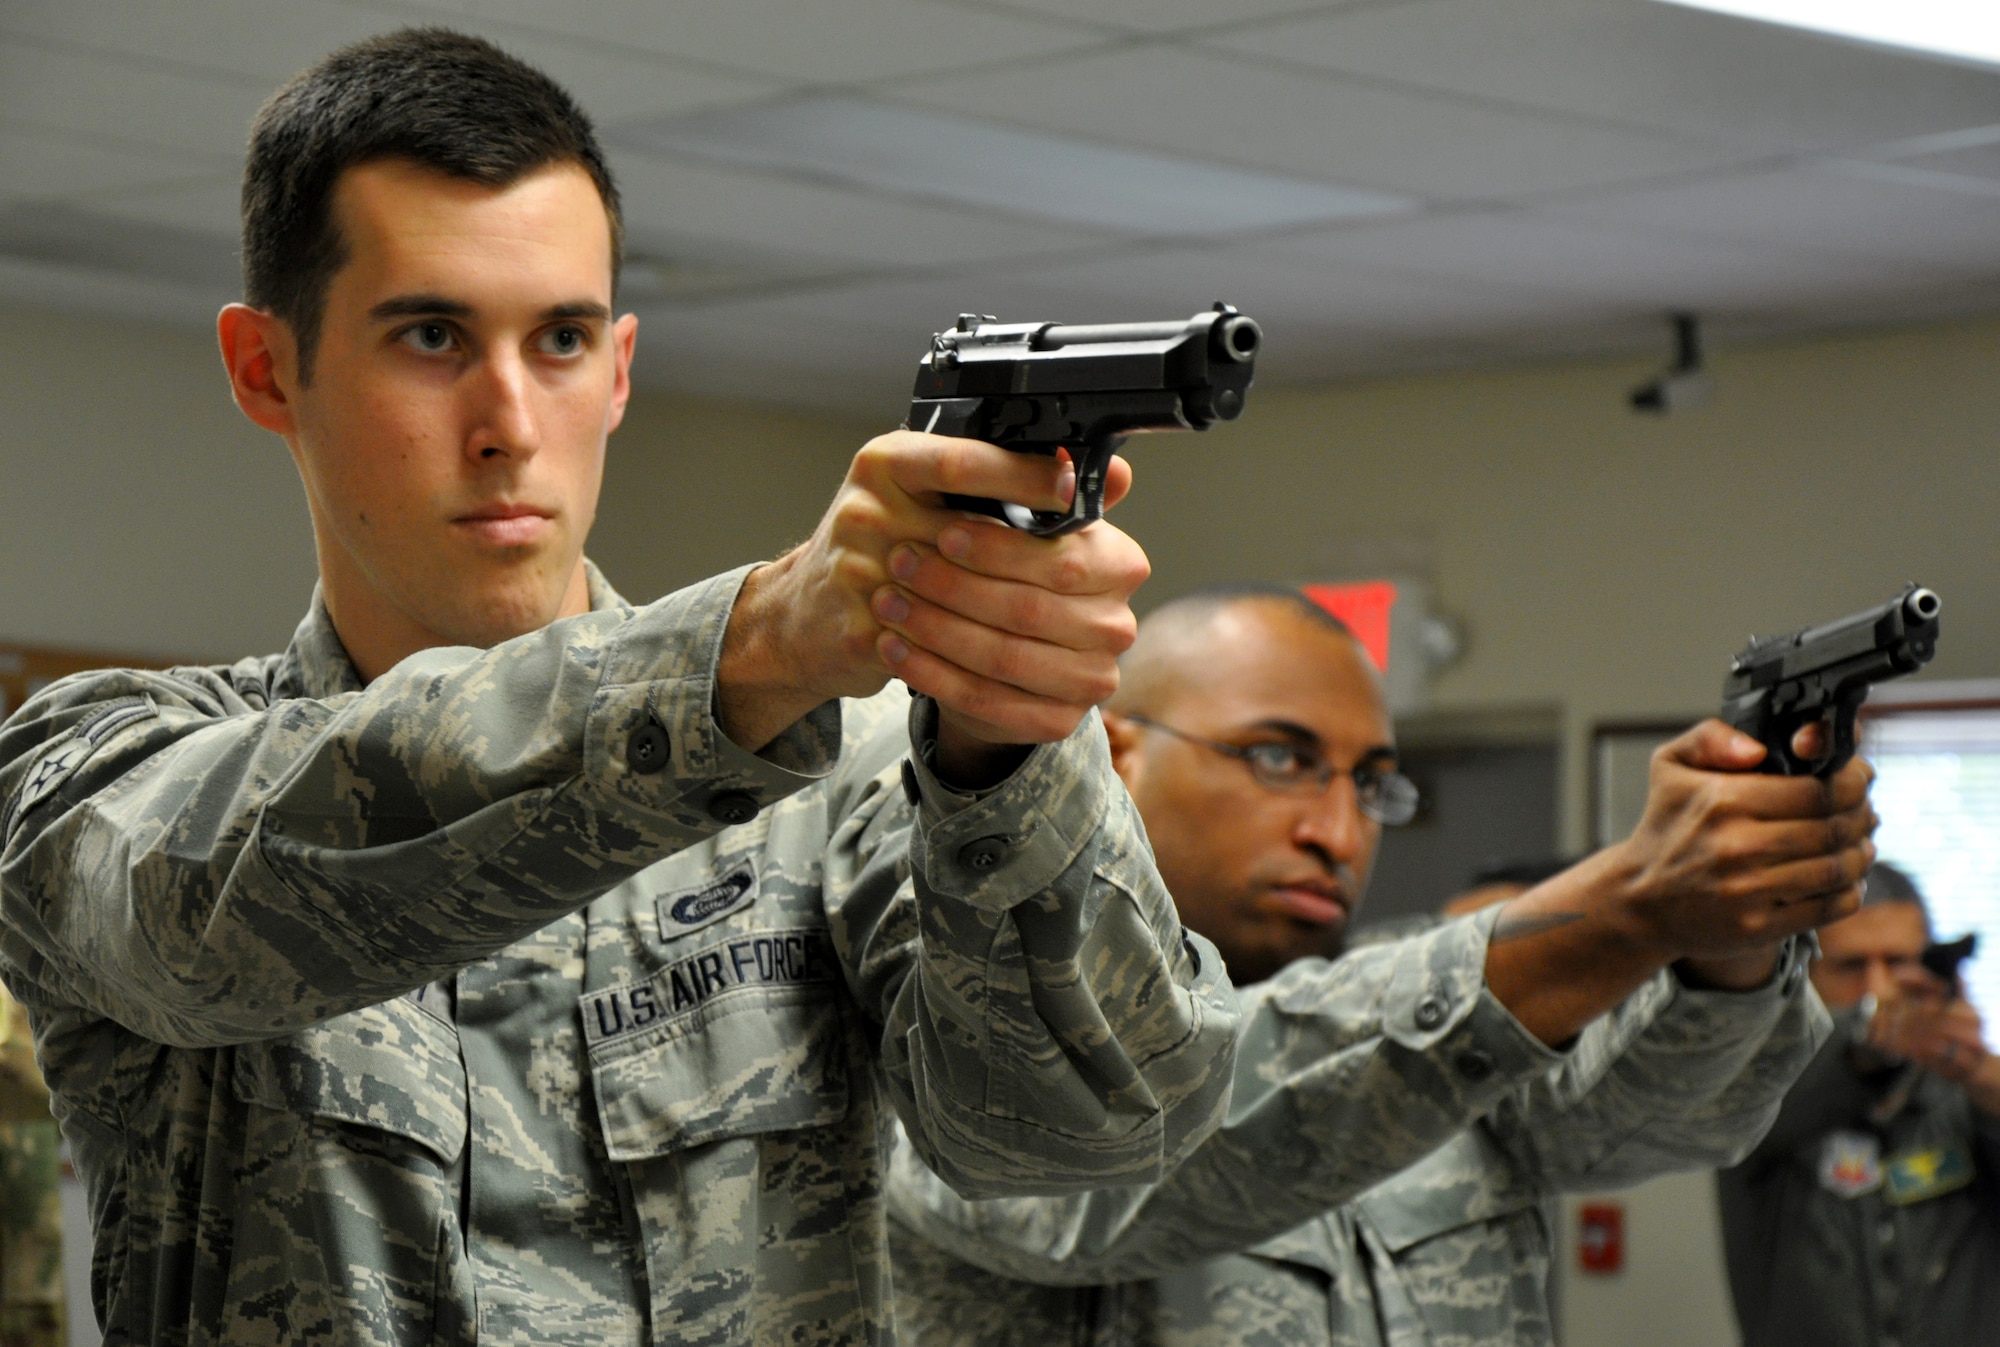 Airmen practice aiming the M-9 pistol during a weapons qualification course at Beale Air Force Base, Calif., Feb. 11, 2014. The course is taught by the 9th Security Forces Squadron combat arms section. (U.S. Air Force photo by Staff Sgt. Robert M. Trujillo/Released)  